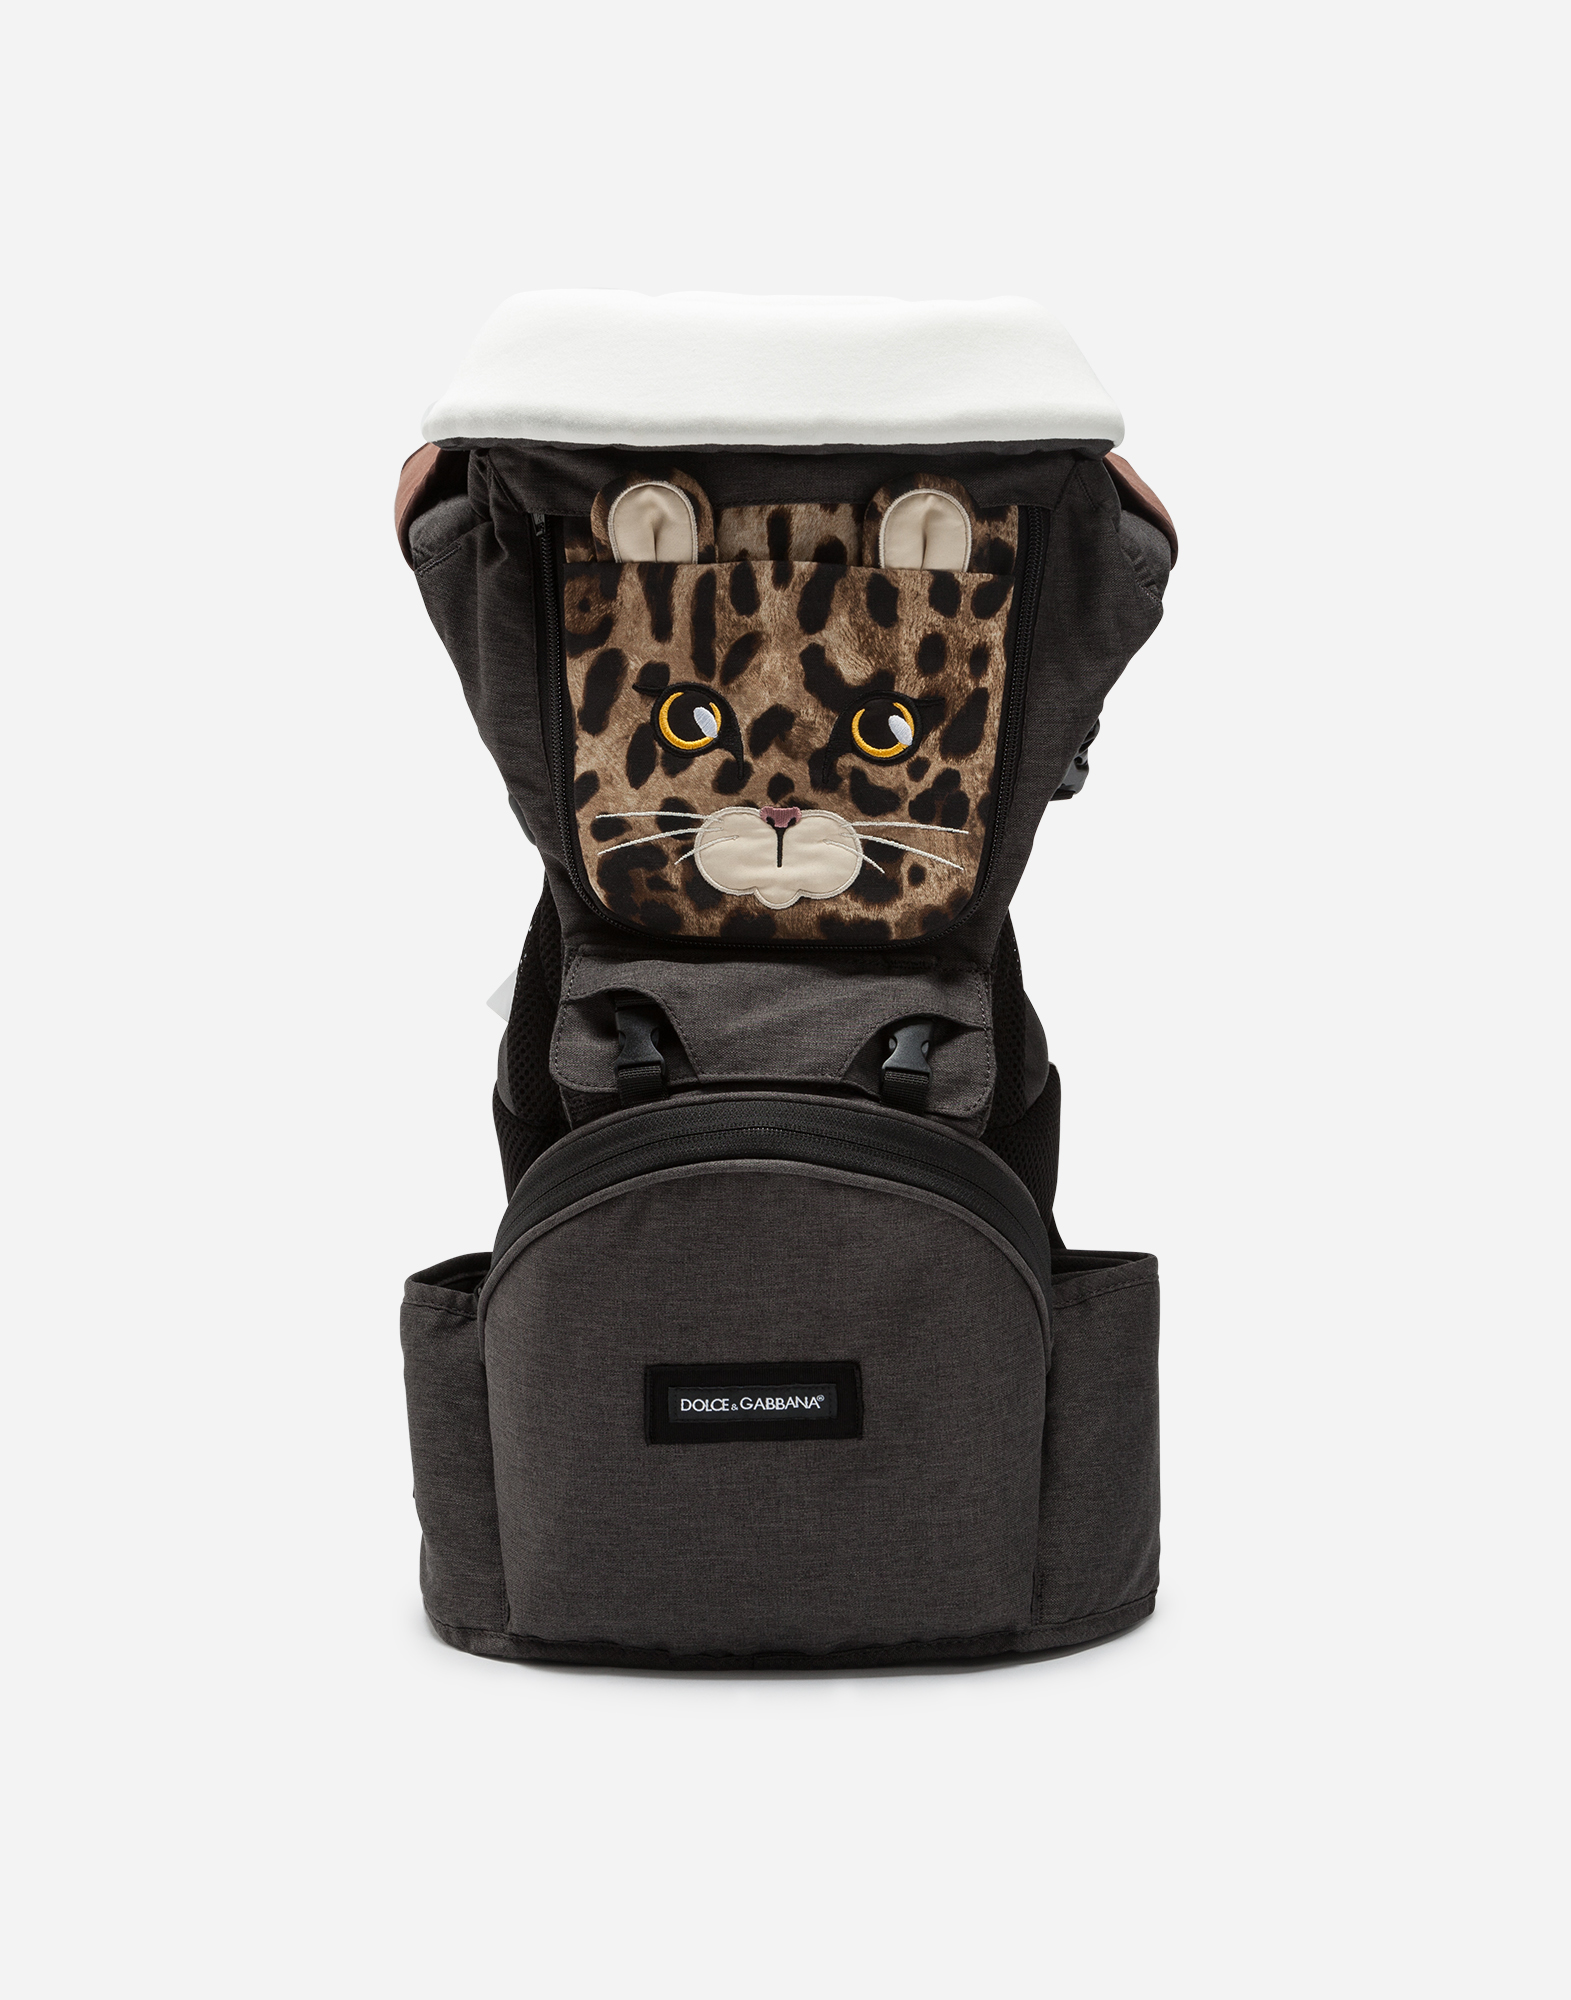 Leopard baby carrier in Multicolor